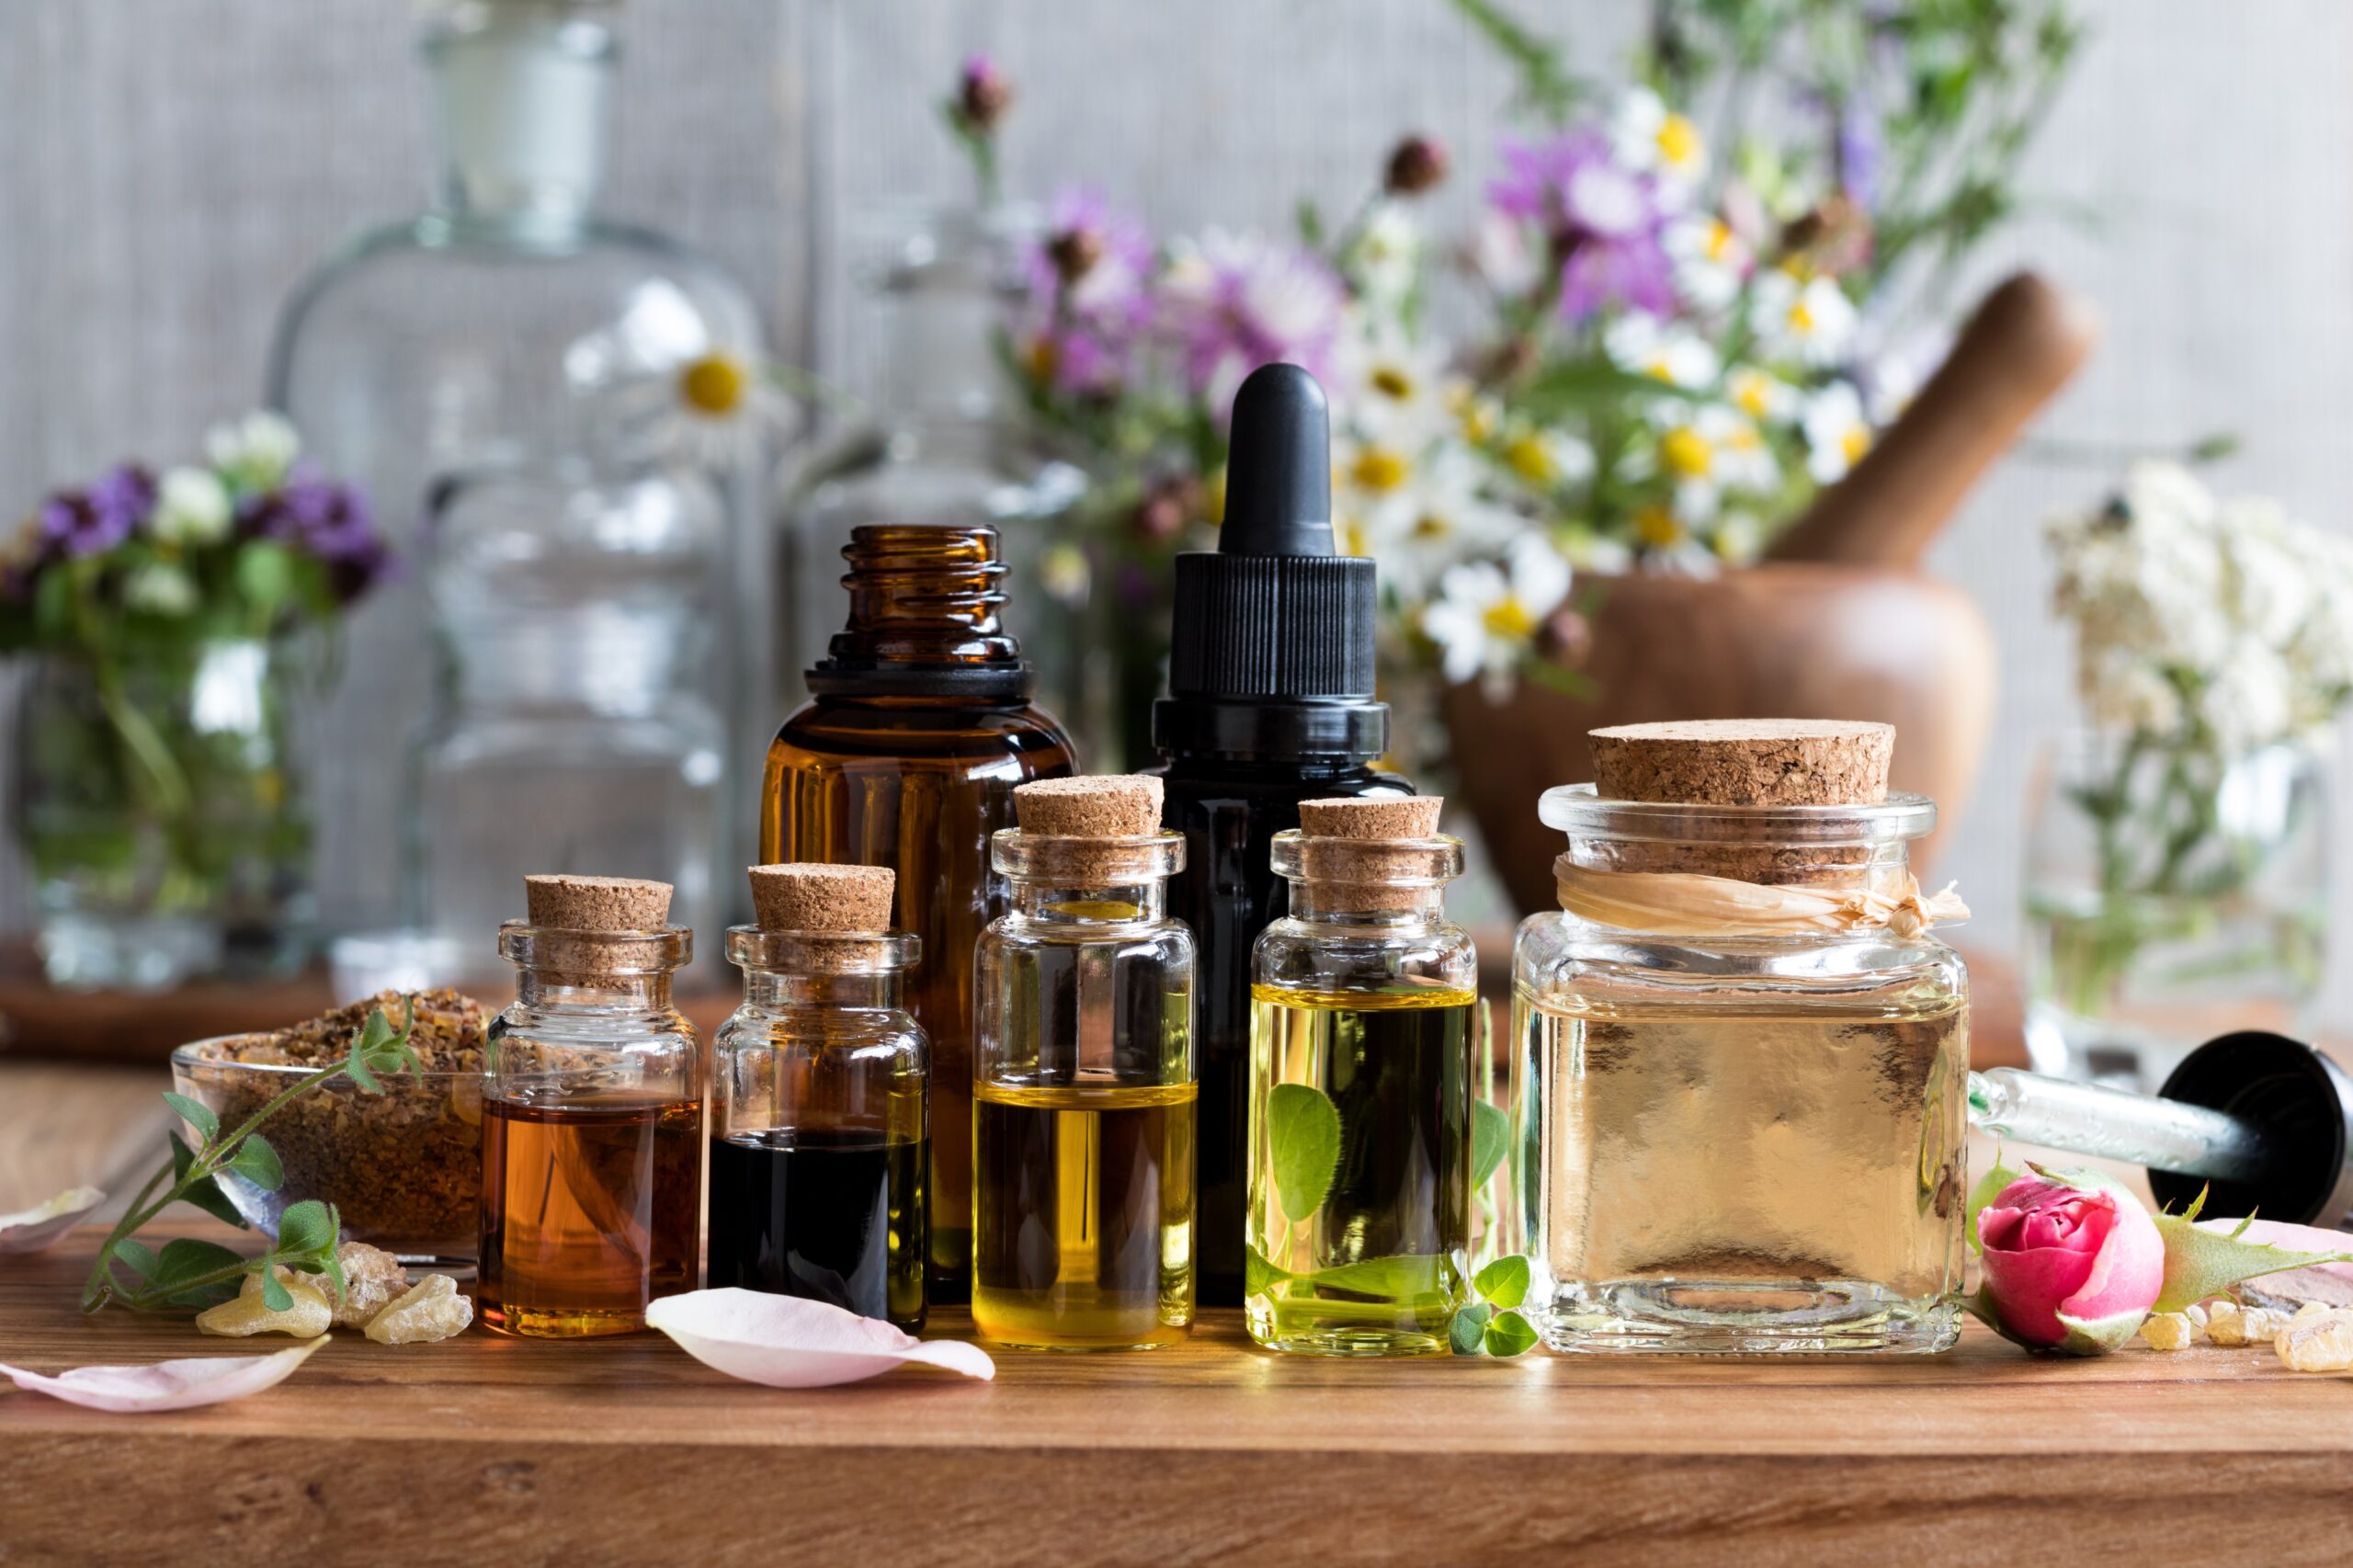 AROMATHERAPY CAN HELP YOU MANAGE STRESS